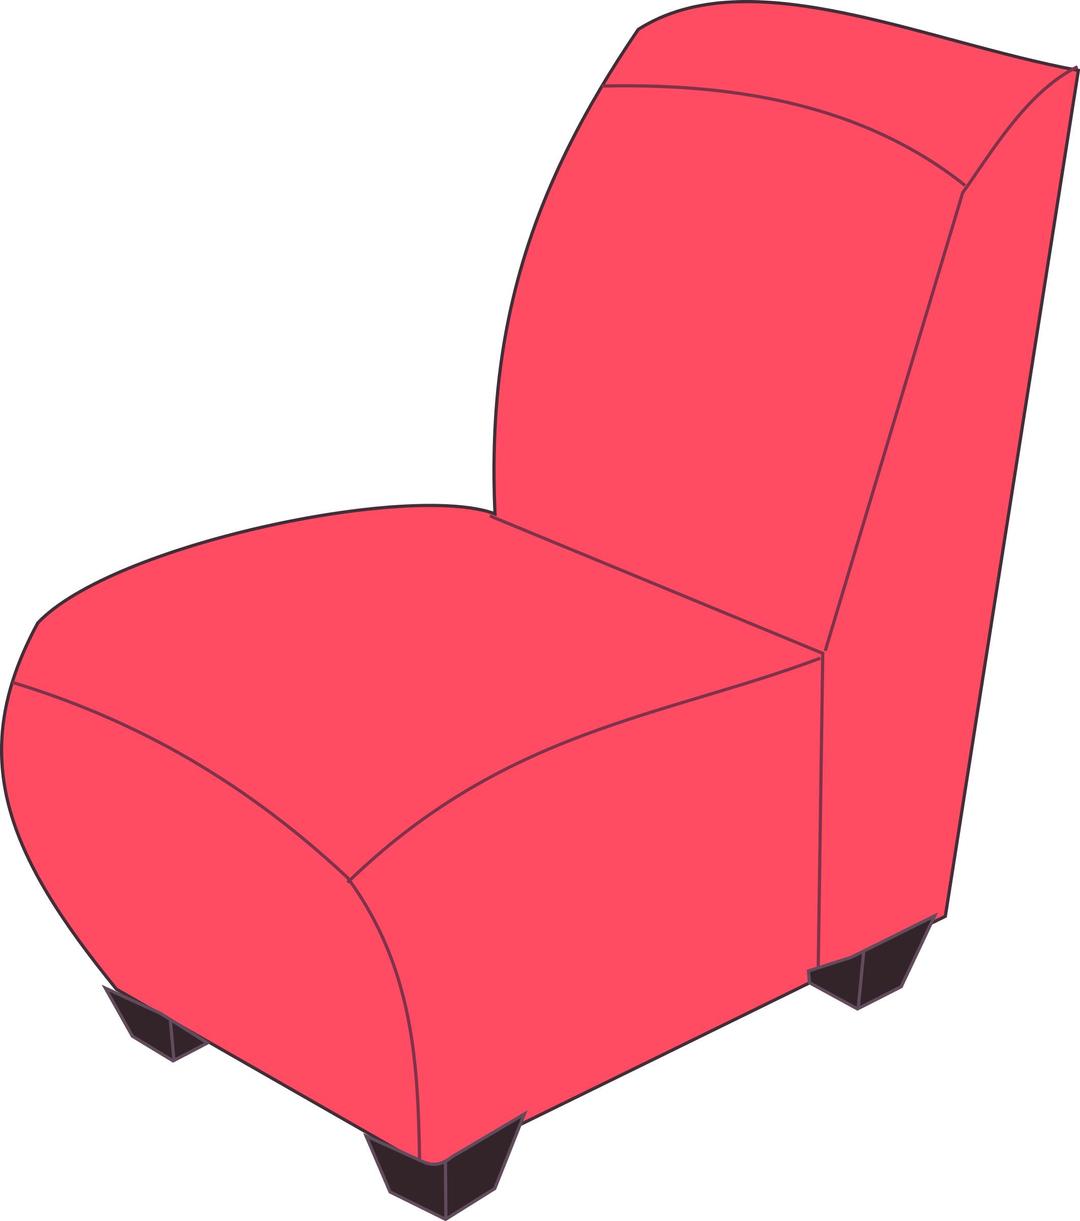 Red armless chair png transparent